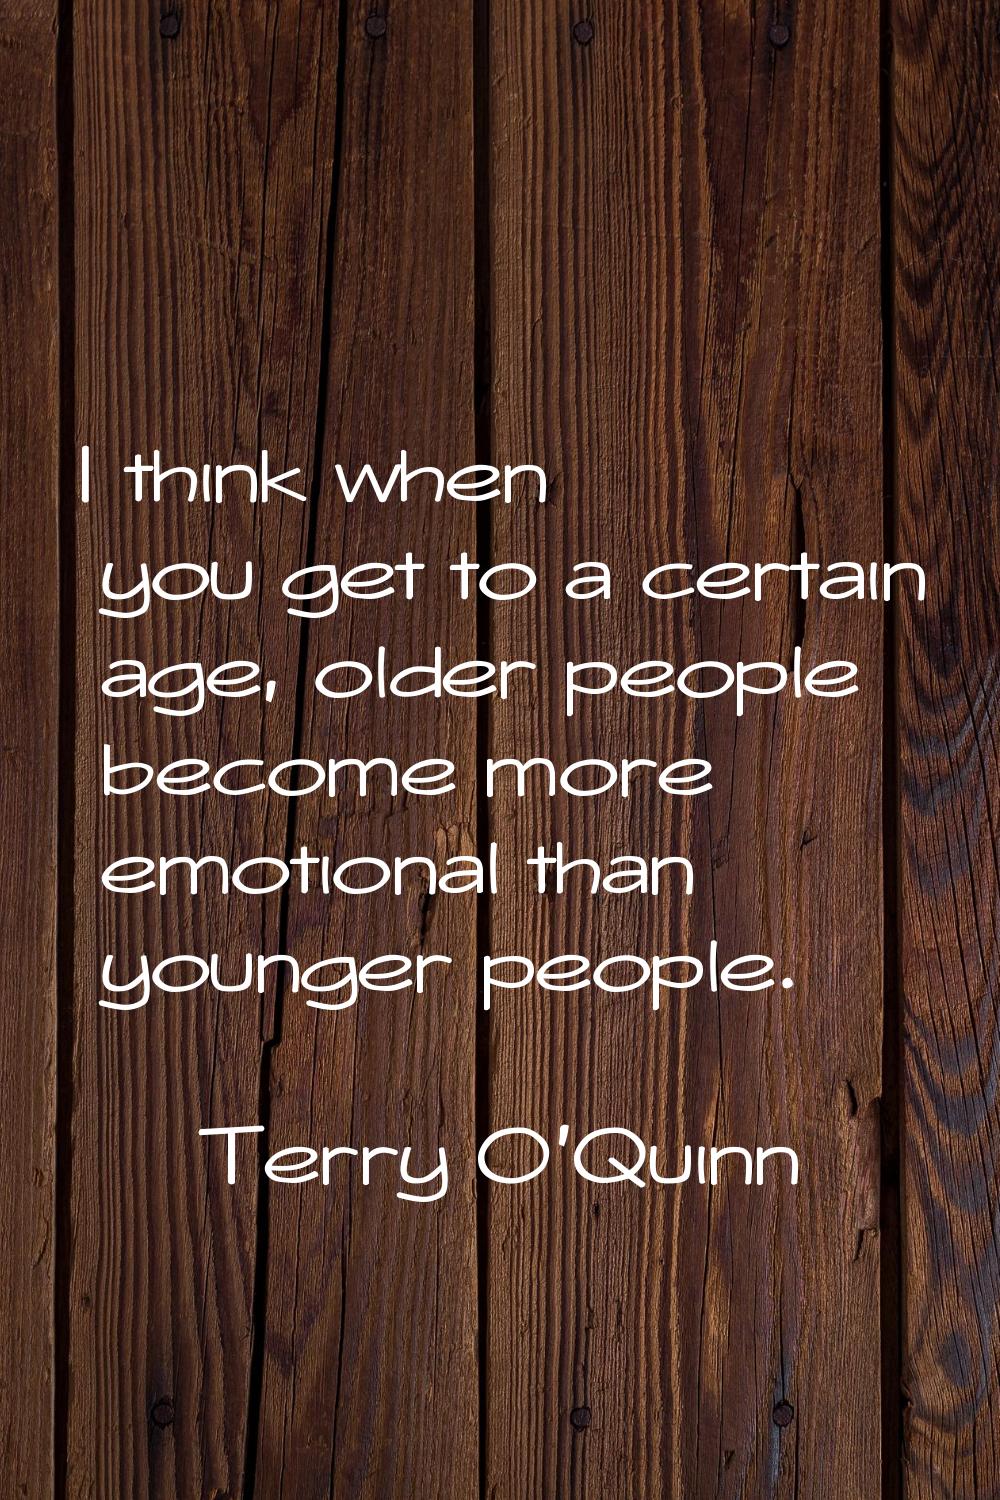 I think when you get to a certain age, older people become more emotional than younger people.